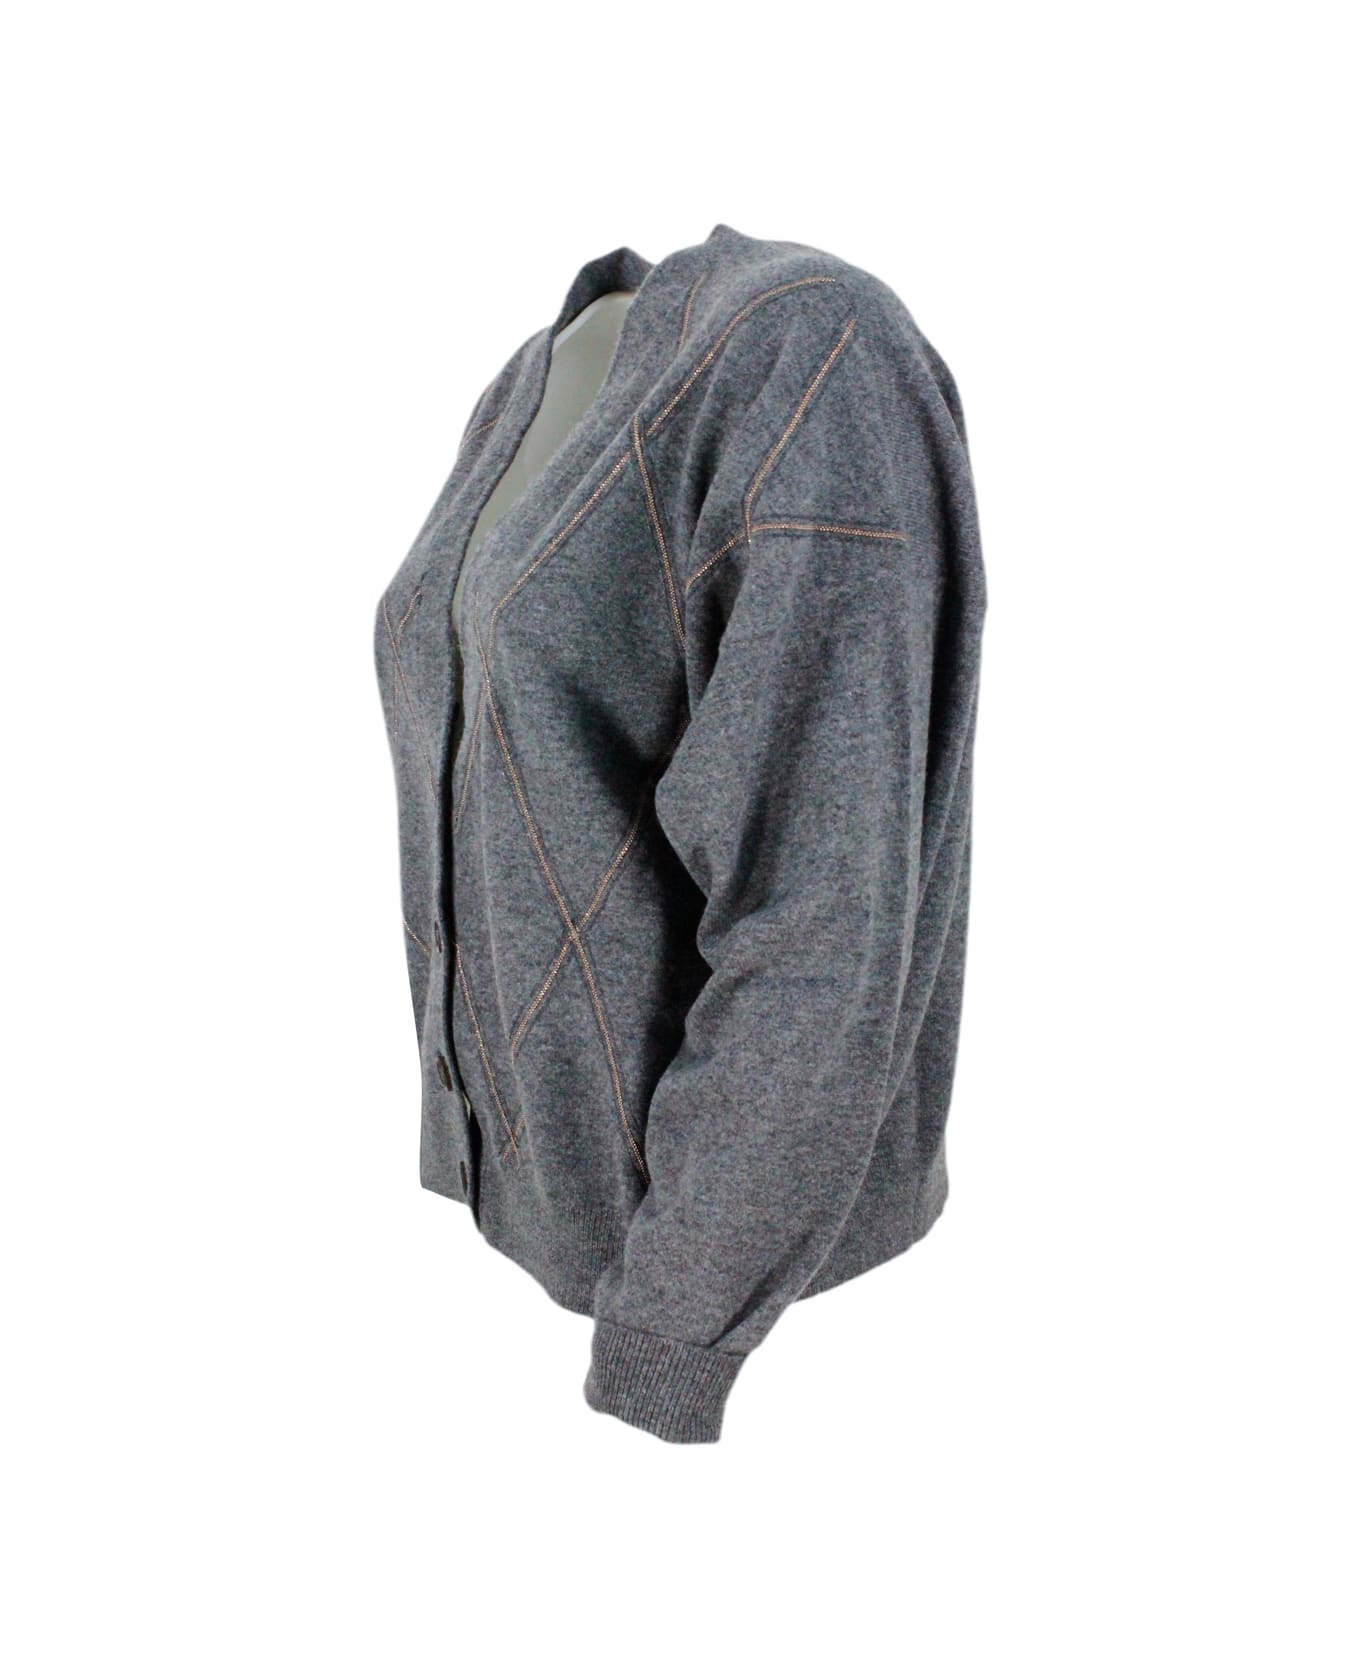 Brunello Cucinelli Cardigan Sweater Made Of Precious And Refined Wool, Silk And Cashmere With Diamond Pattern Embellished With Rows Of Brilliant Monili - Grey